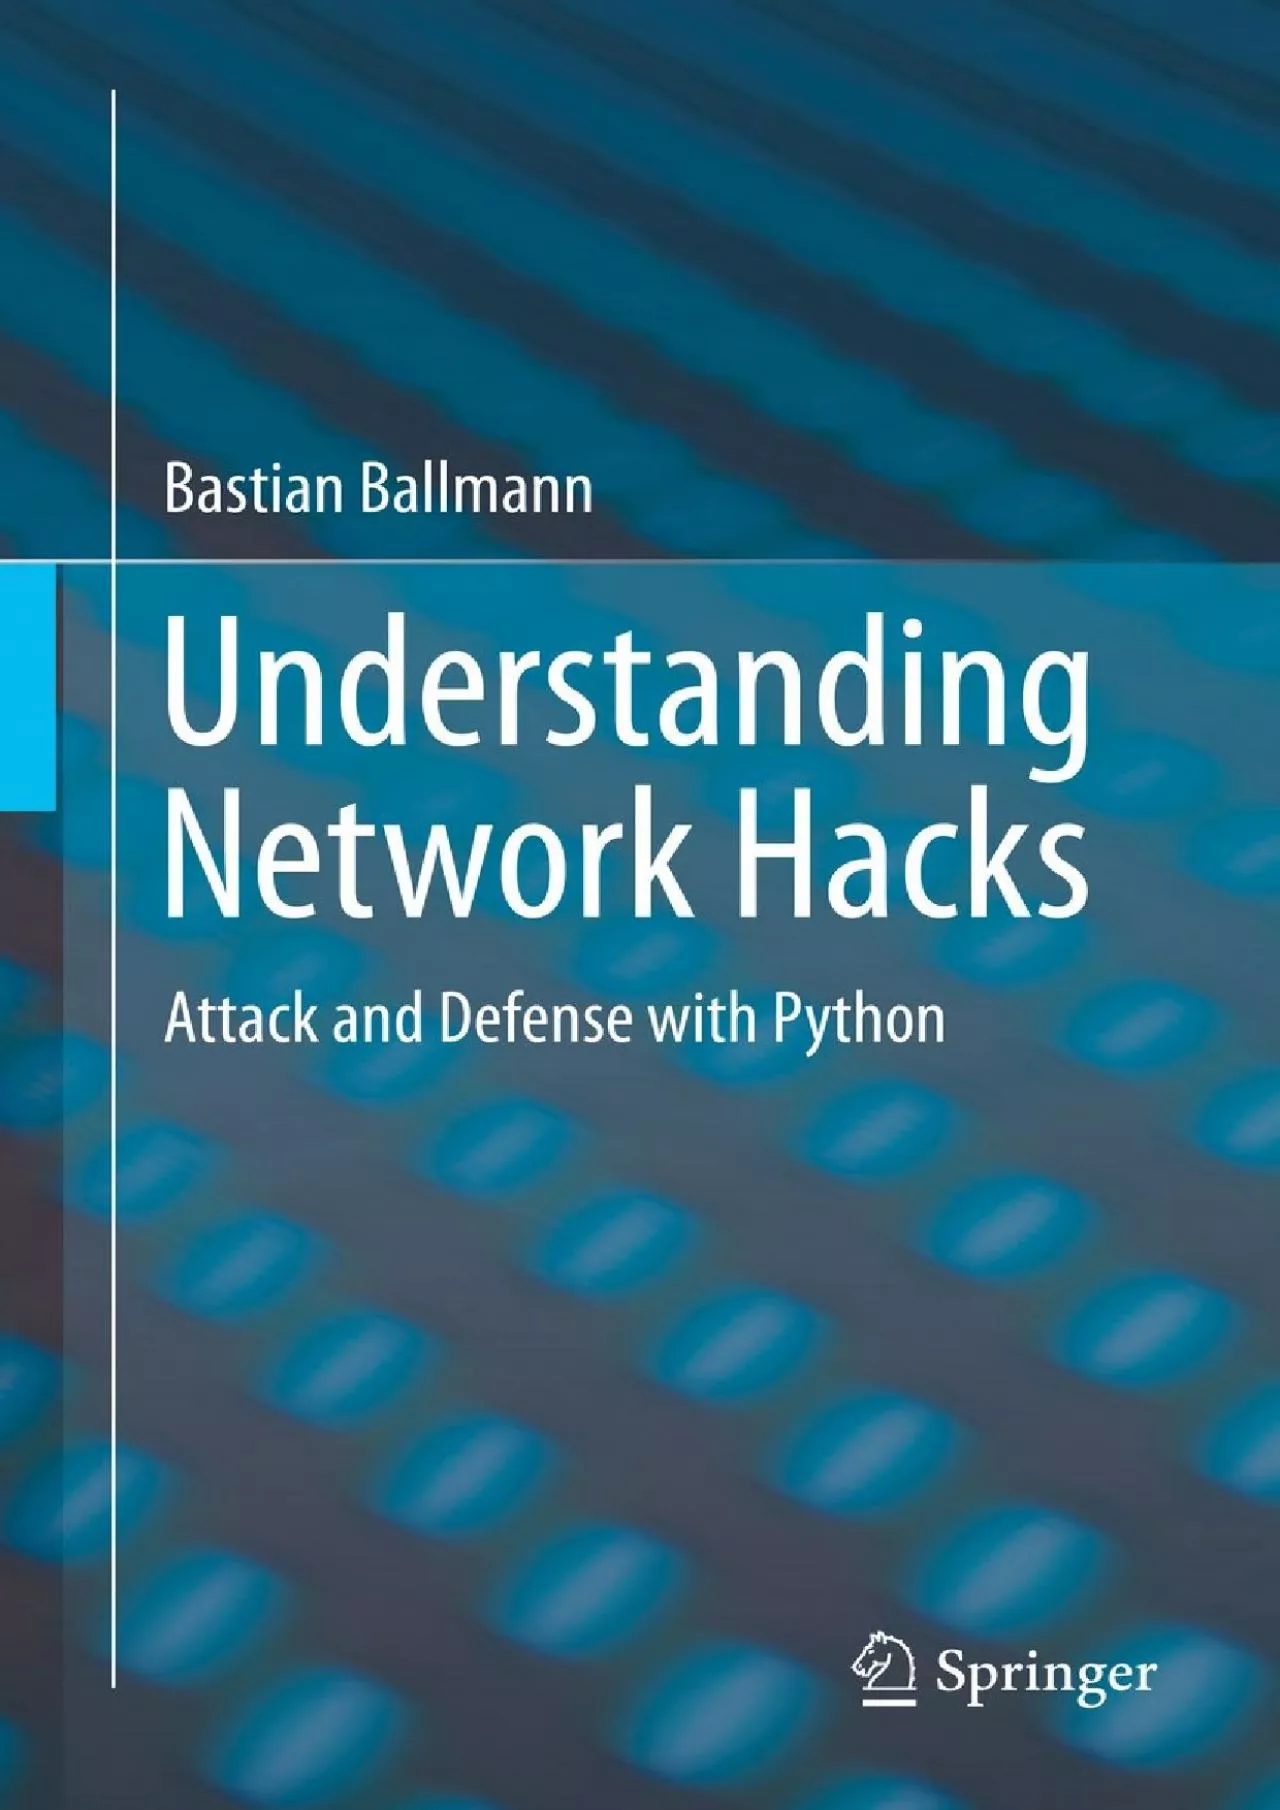 [DOWLOAD]-Understanding Network Hacks: Attack and Defense with Python